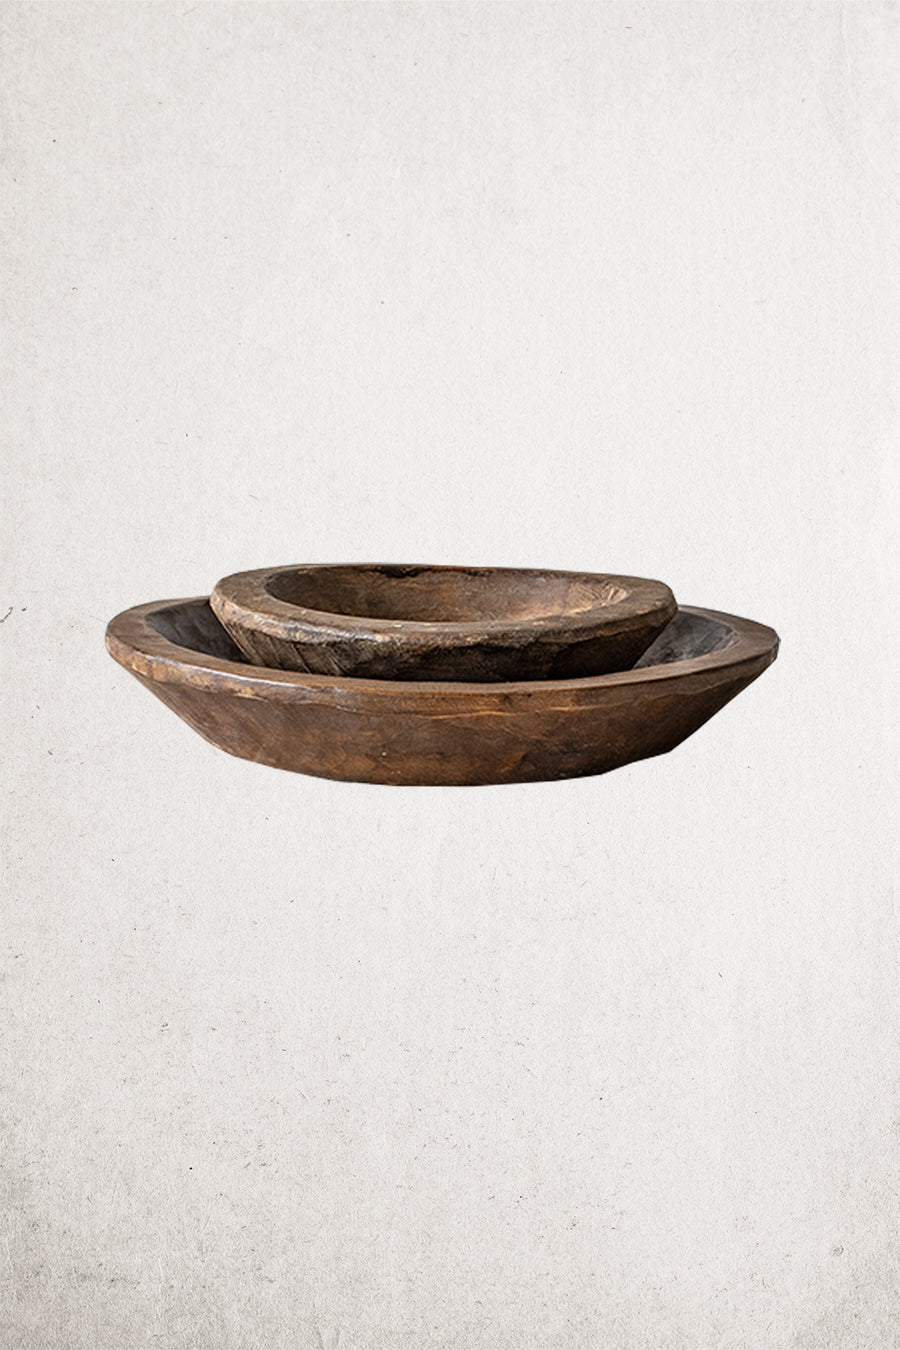 Rustic Waxed Wood Bowl - Round